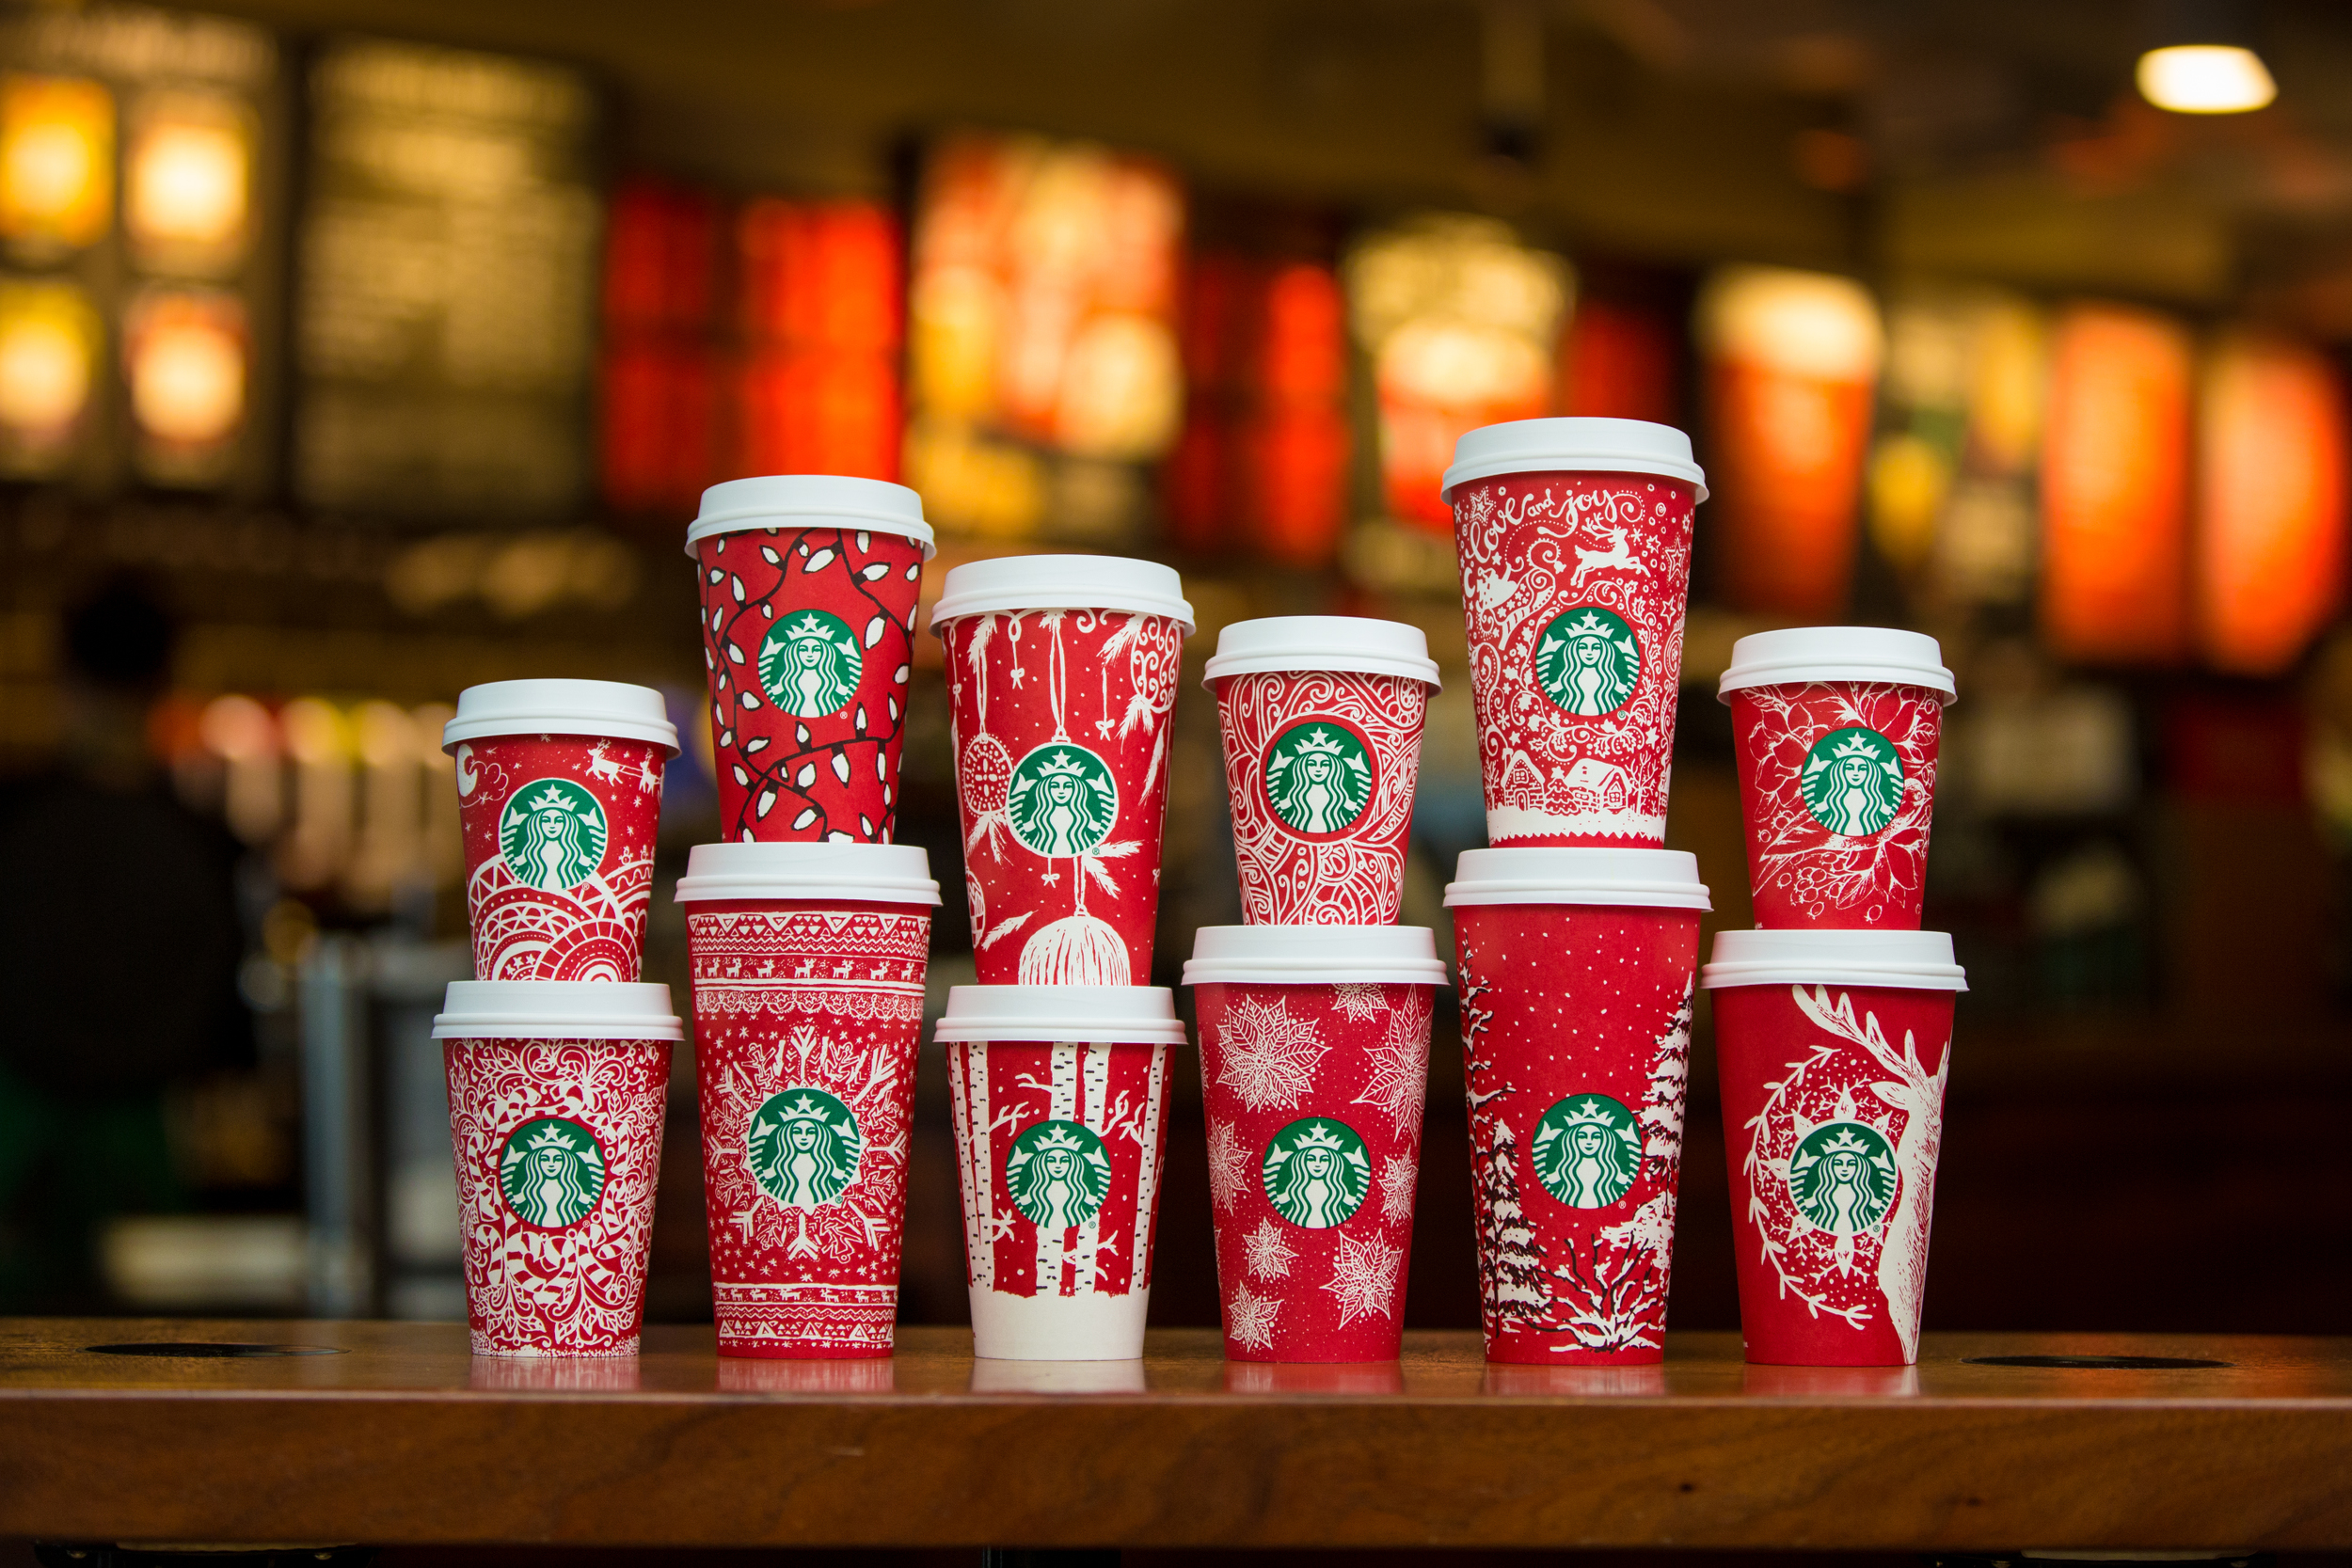 Starbucks global growth plans resonated with SmartBrief readers